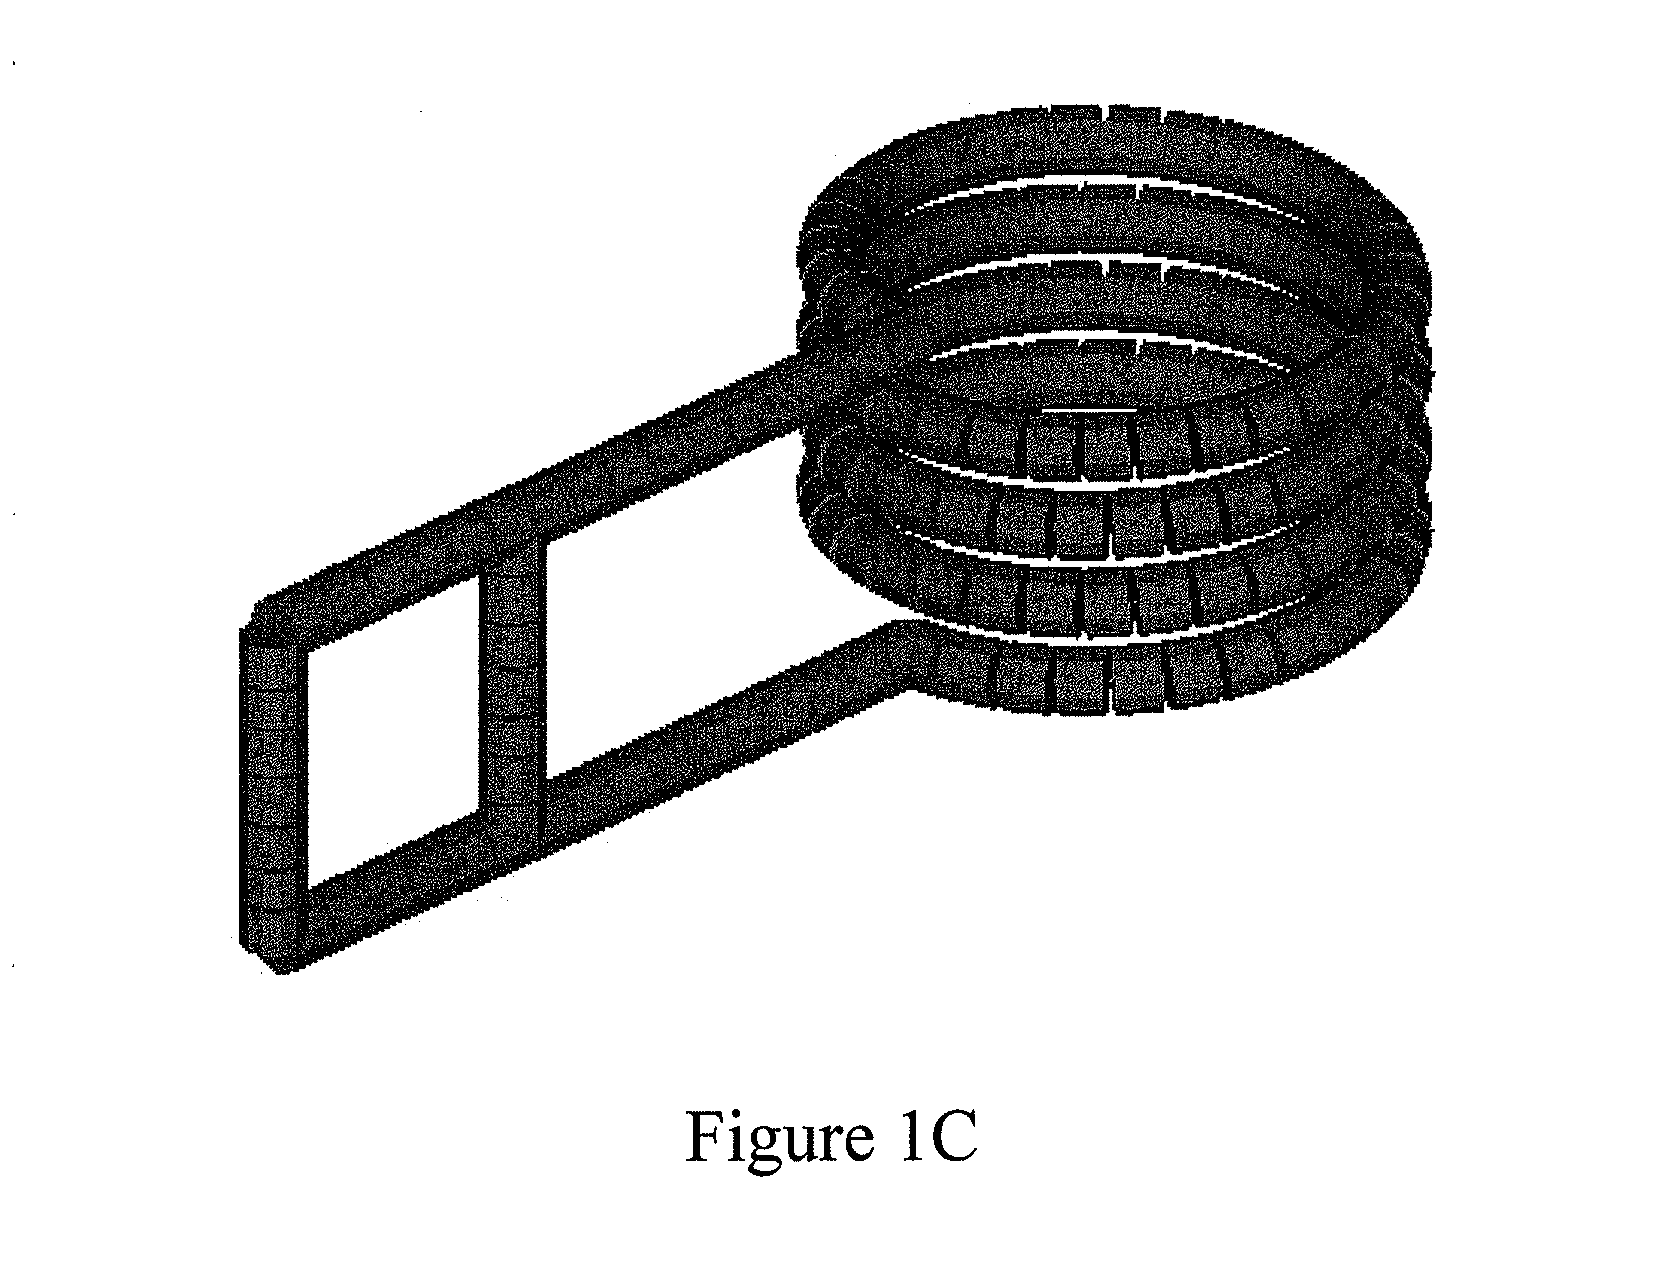 Systems and Methods to Reduce Power Deposition in Tissue Exposed to Radio Frequency Electromagnetic Fields